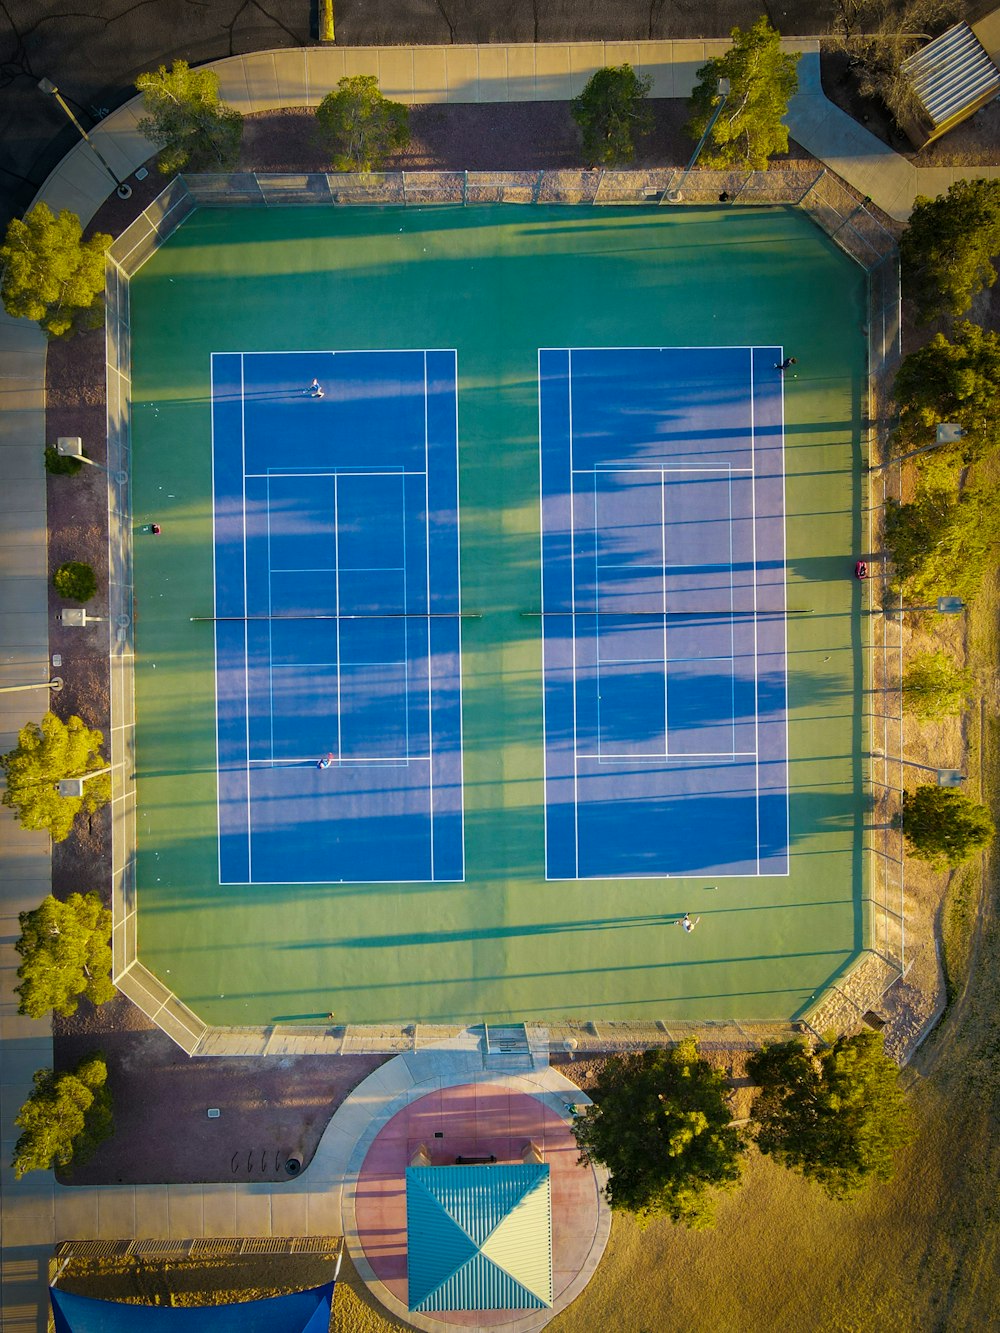 an aerial view of a tennis court with two tennis courts